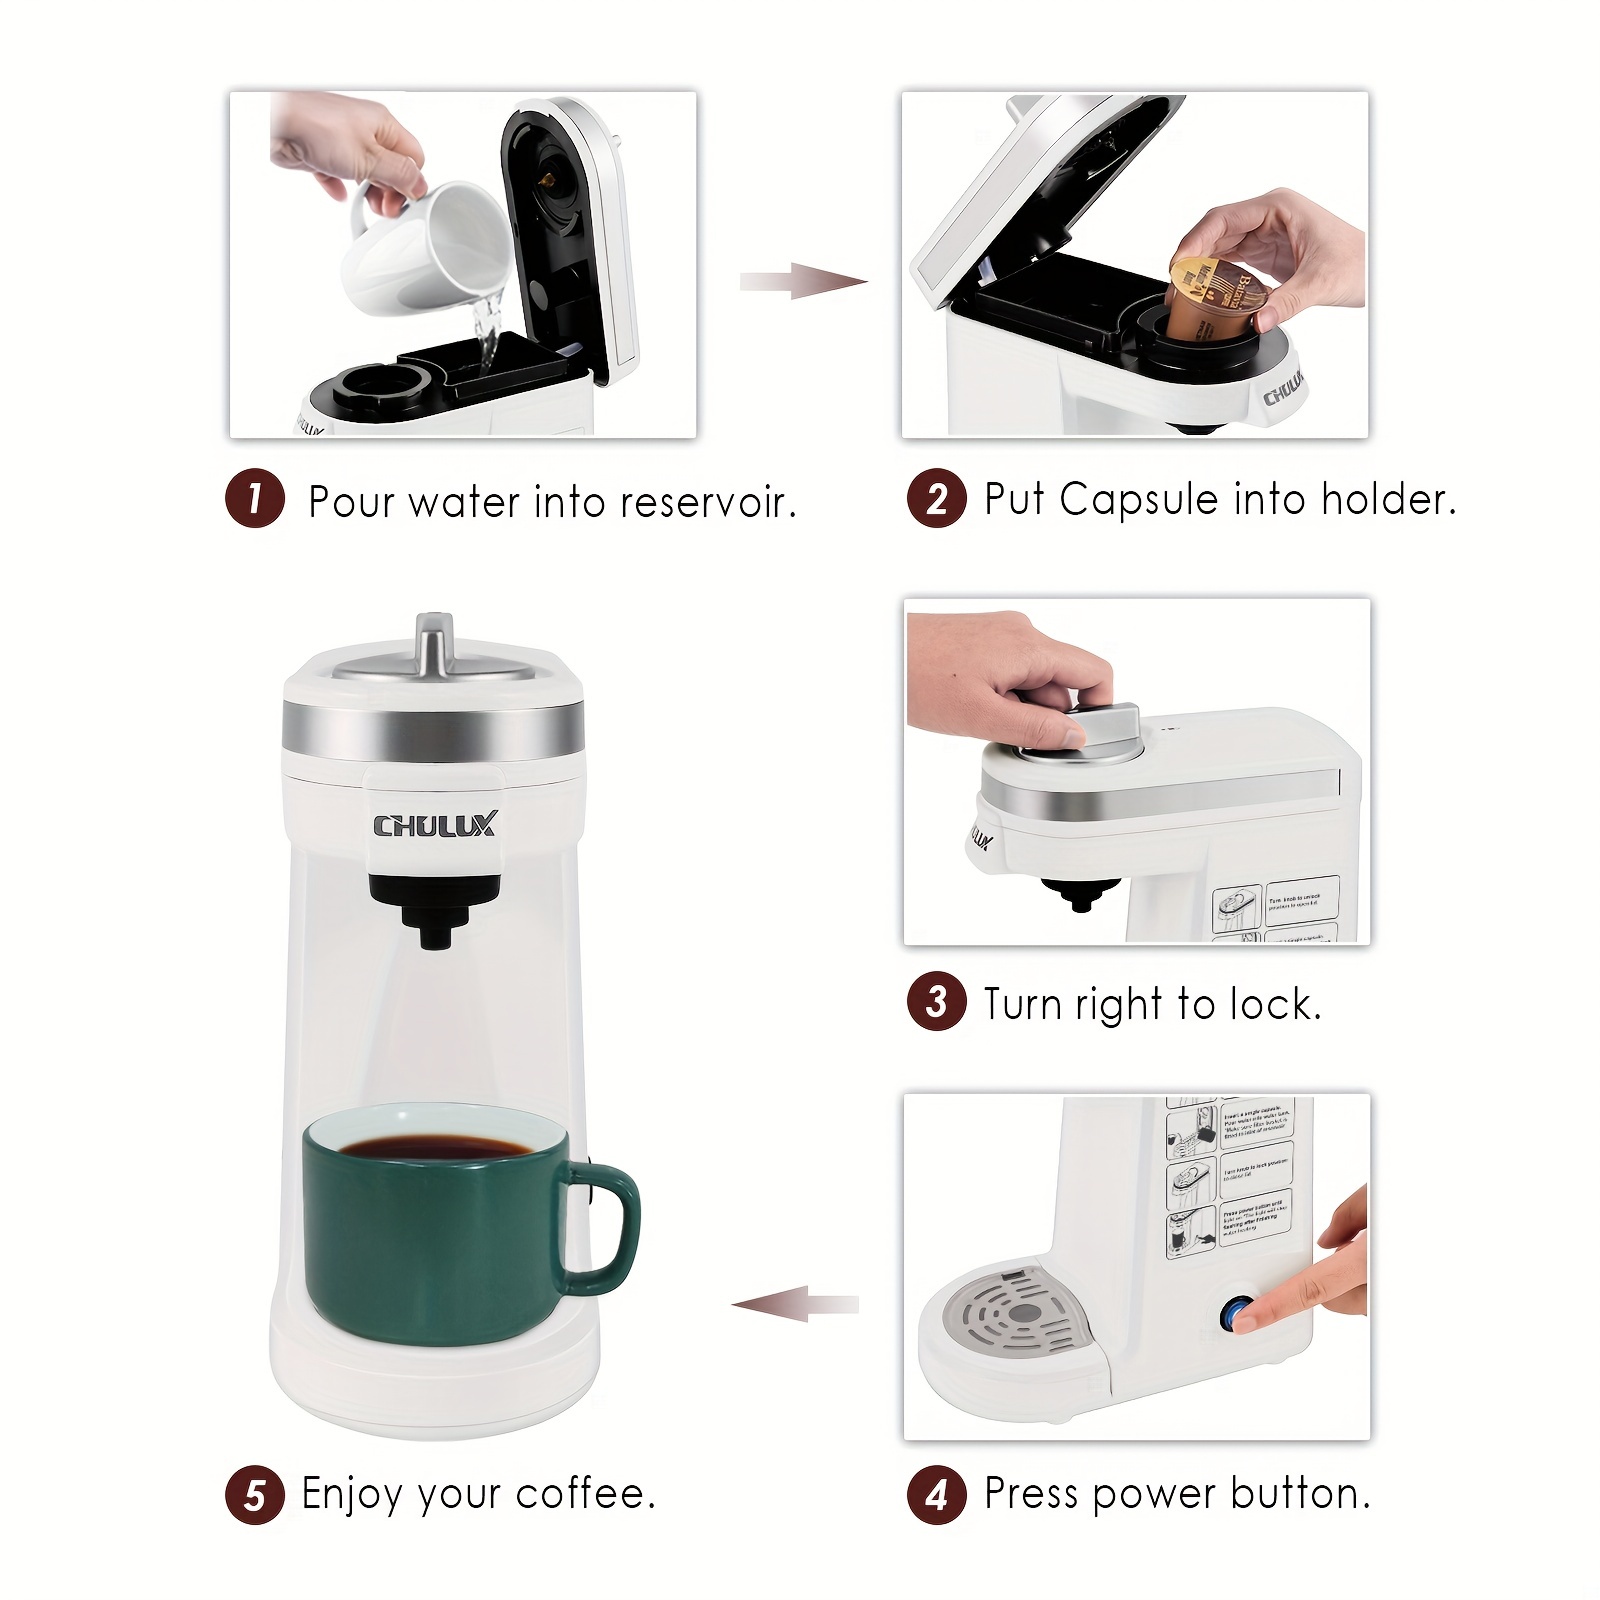 CHULUX Single Serve / Cup [Coffee] Maker Brewer for K-Cup & Ground & Tea  Leaf, Travel